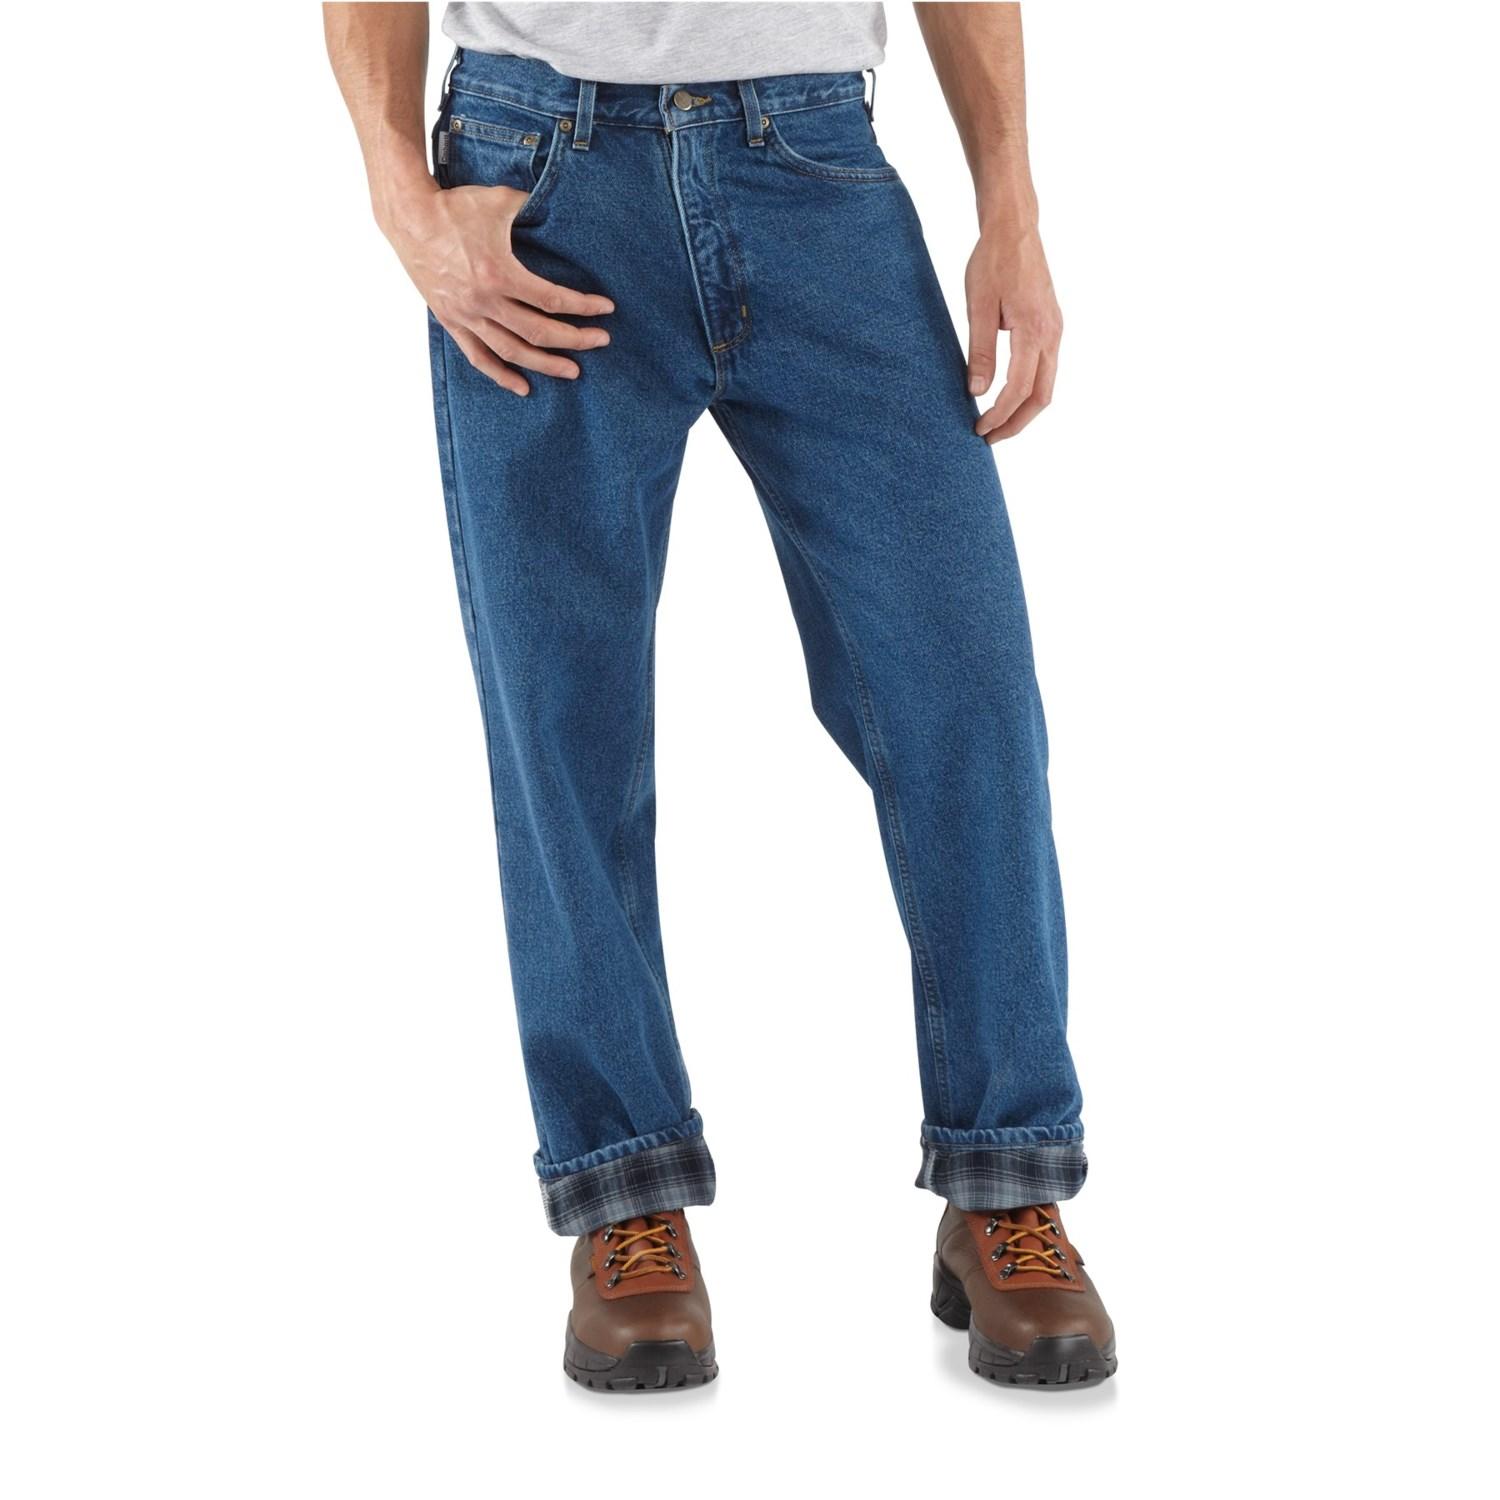 Carhartt B172 Relaxed Fit Flannel-lined Jeans in Blue for Men - Lyst